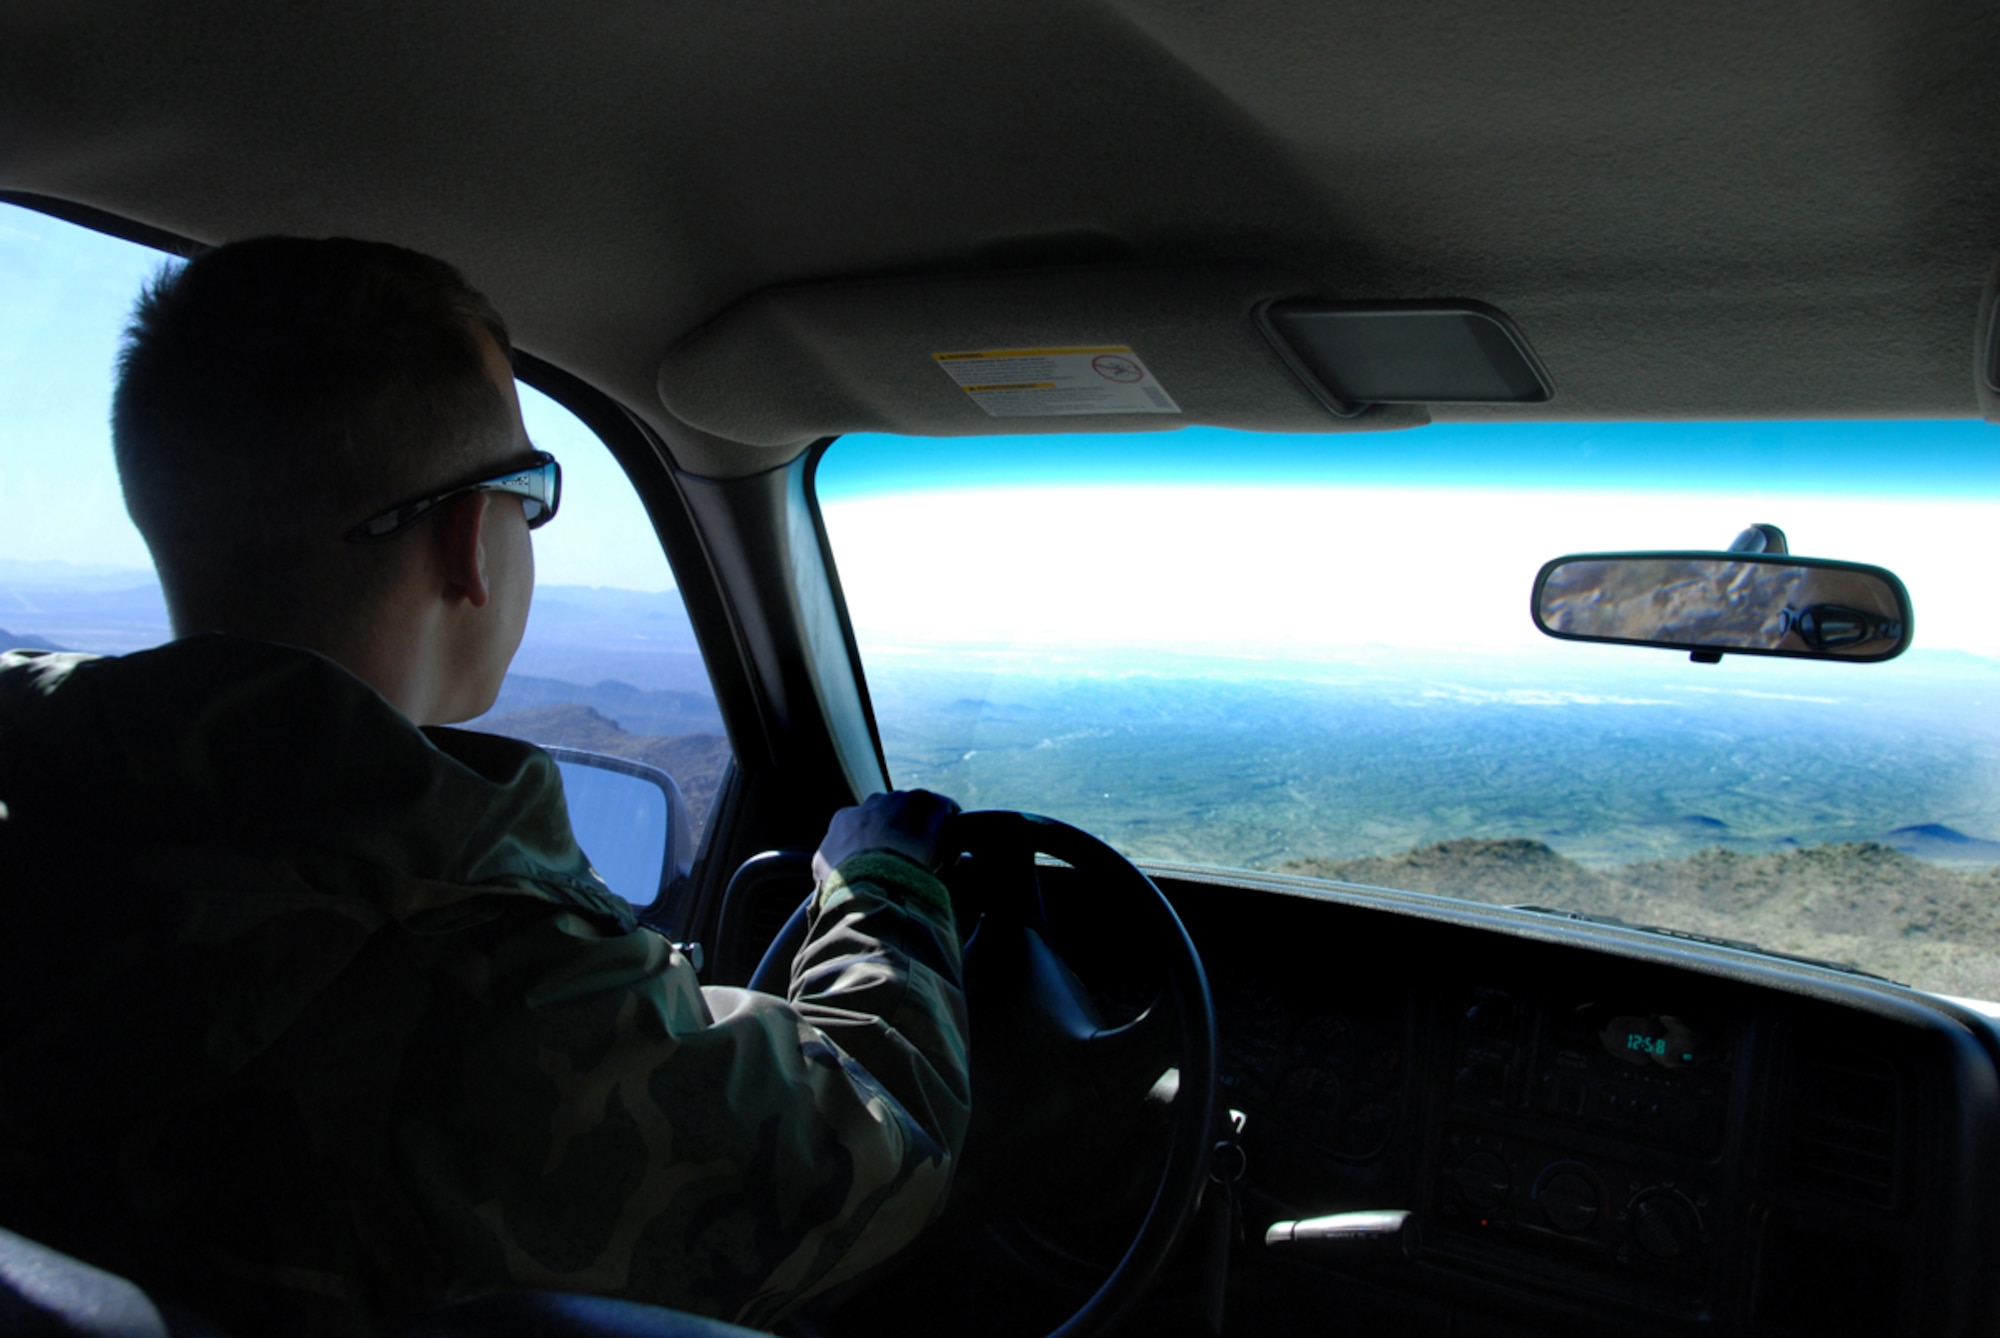 Senior Airman Robert MacCourt, 607th Air Control Squadron ground radio technician, navigates a turn on a road in the White Tank Mountains on his return to Luke.The 607th is a tennant unit of Luke, and conducts initial qualification training for operations crew personnel assigned to ACSs. 